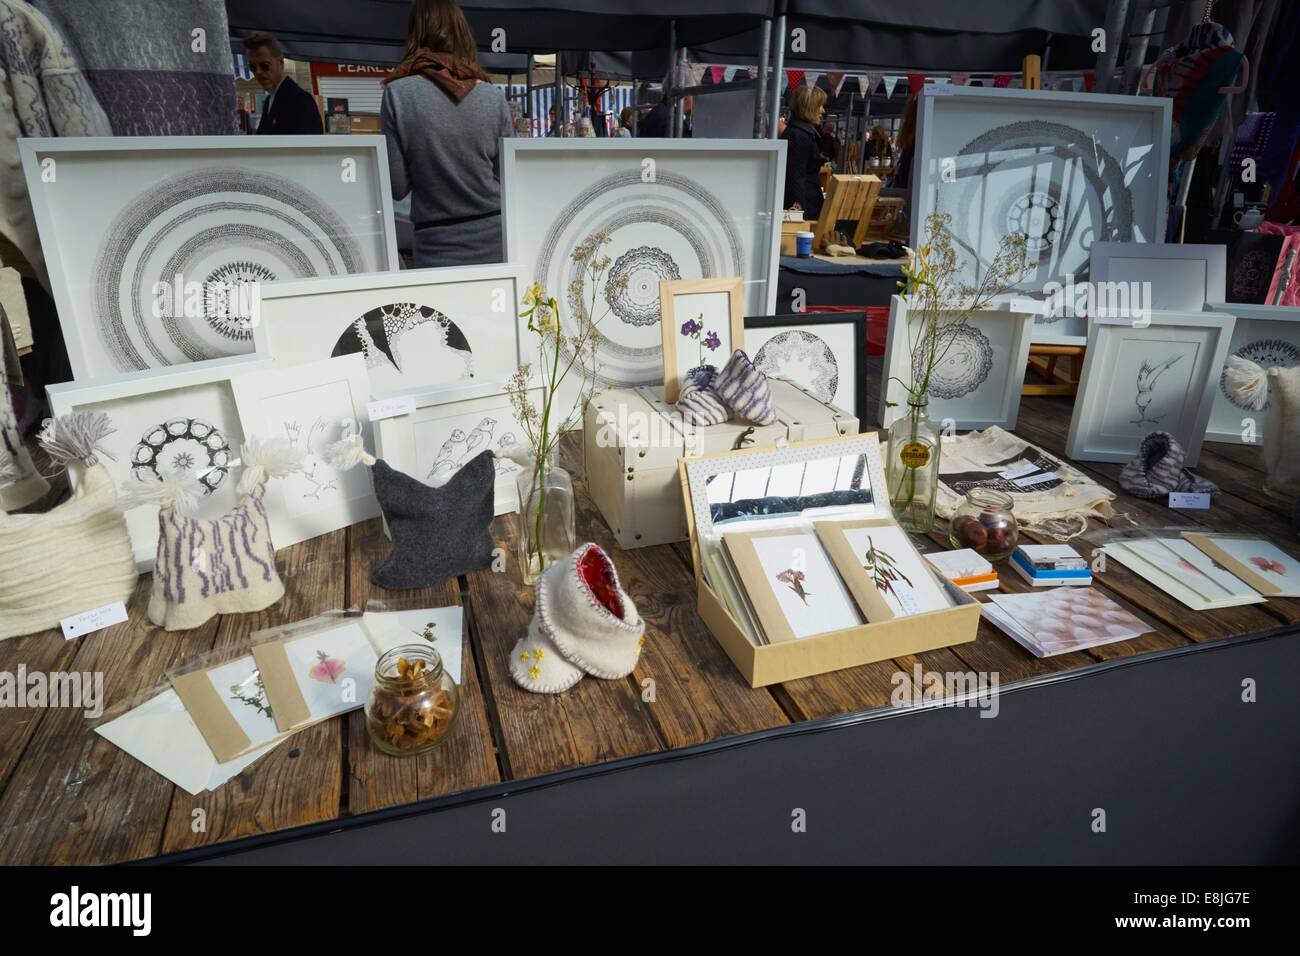 A stall in a craft fair in Altrincham Market, Cheshire showing miscellaneous hand made original items including cards Stock Photo